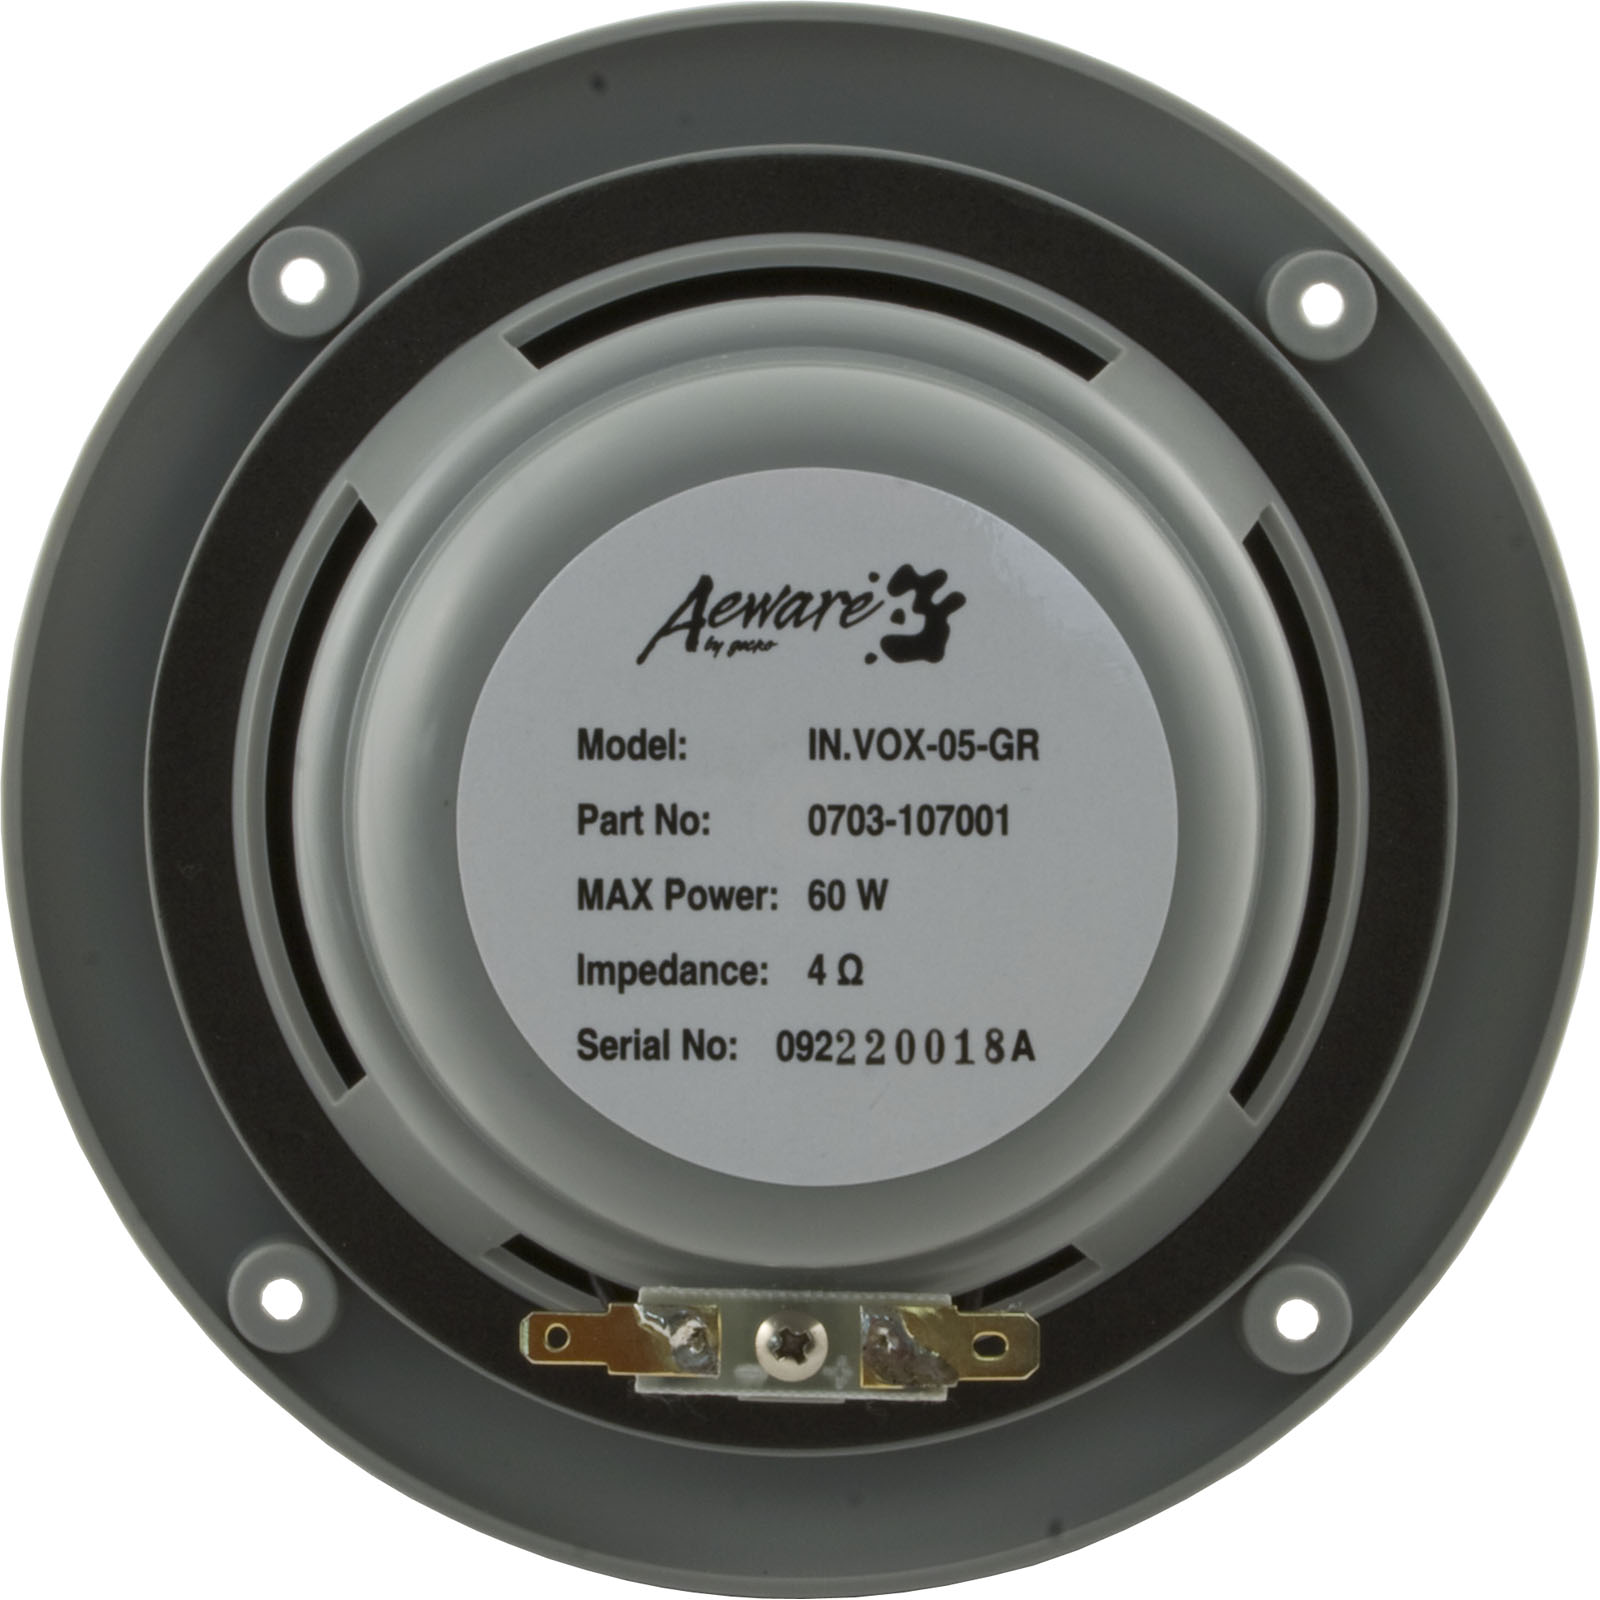 Picture of Flush Mount Speaker, Gecko in.vox, 5-1/4", 60w, Gray, qty 2